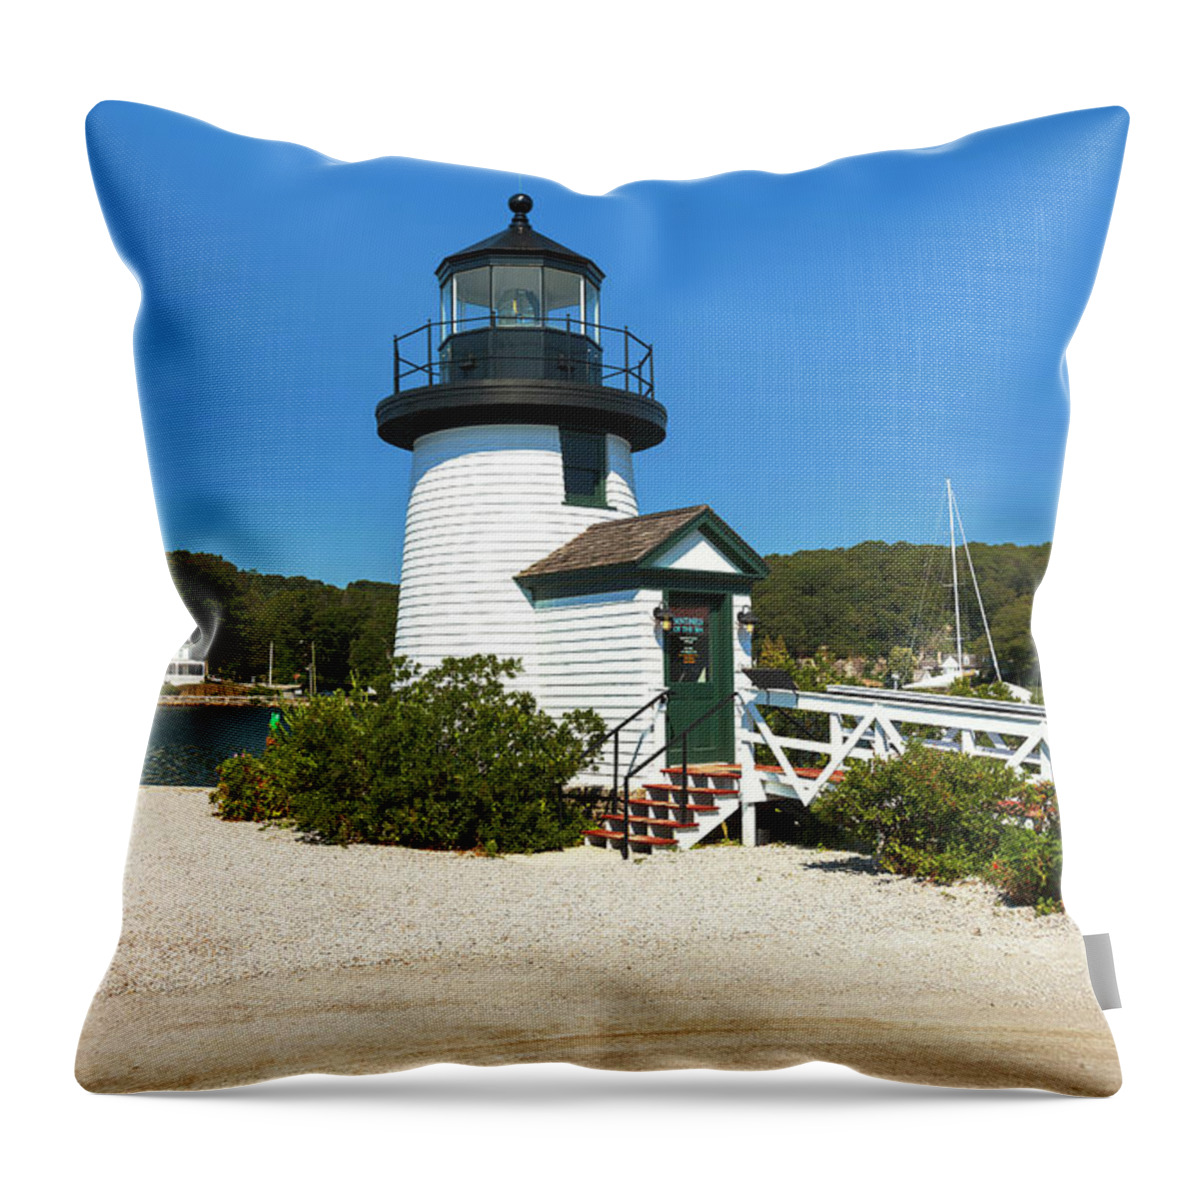 Estock Throw Pillow featuring the digital art Lighthouse In Mystic Seaport by Claudia Uripos